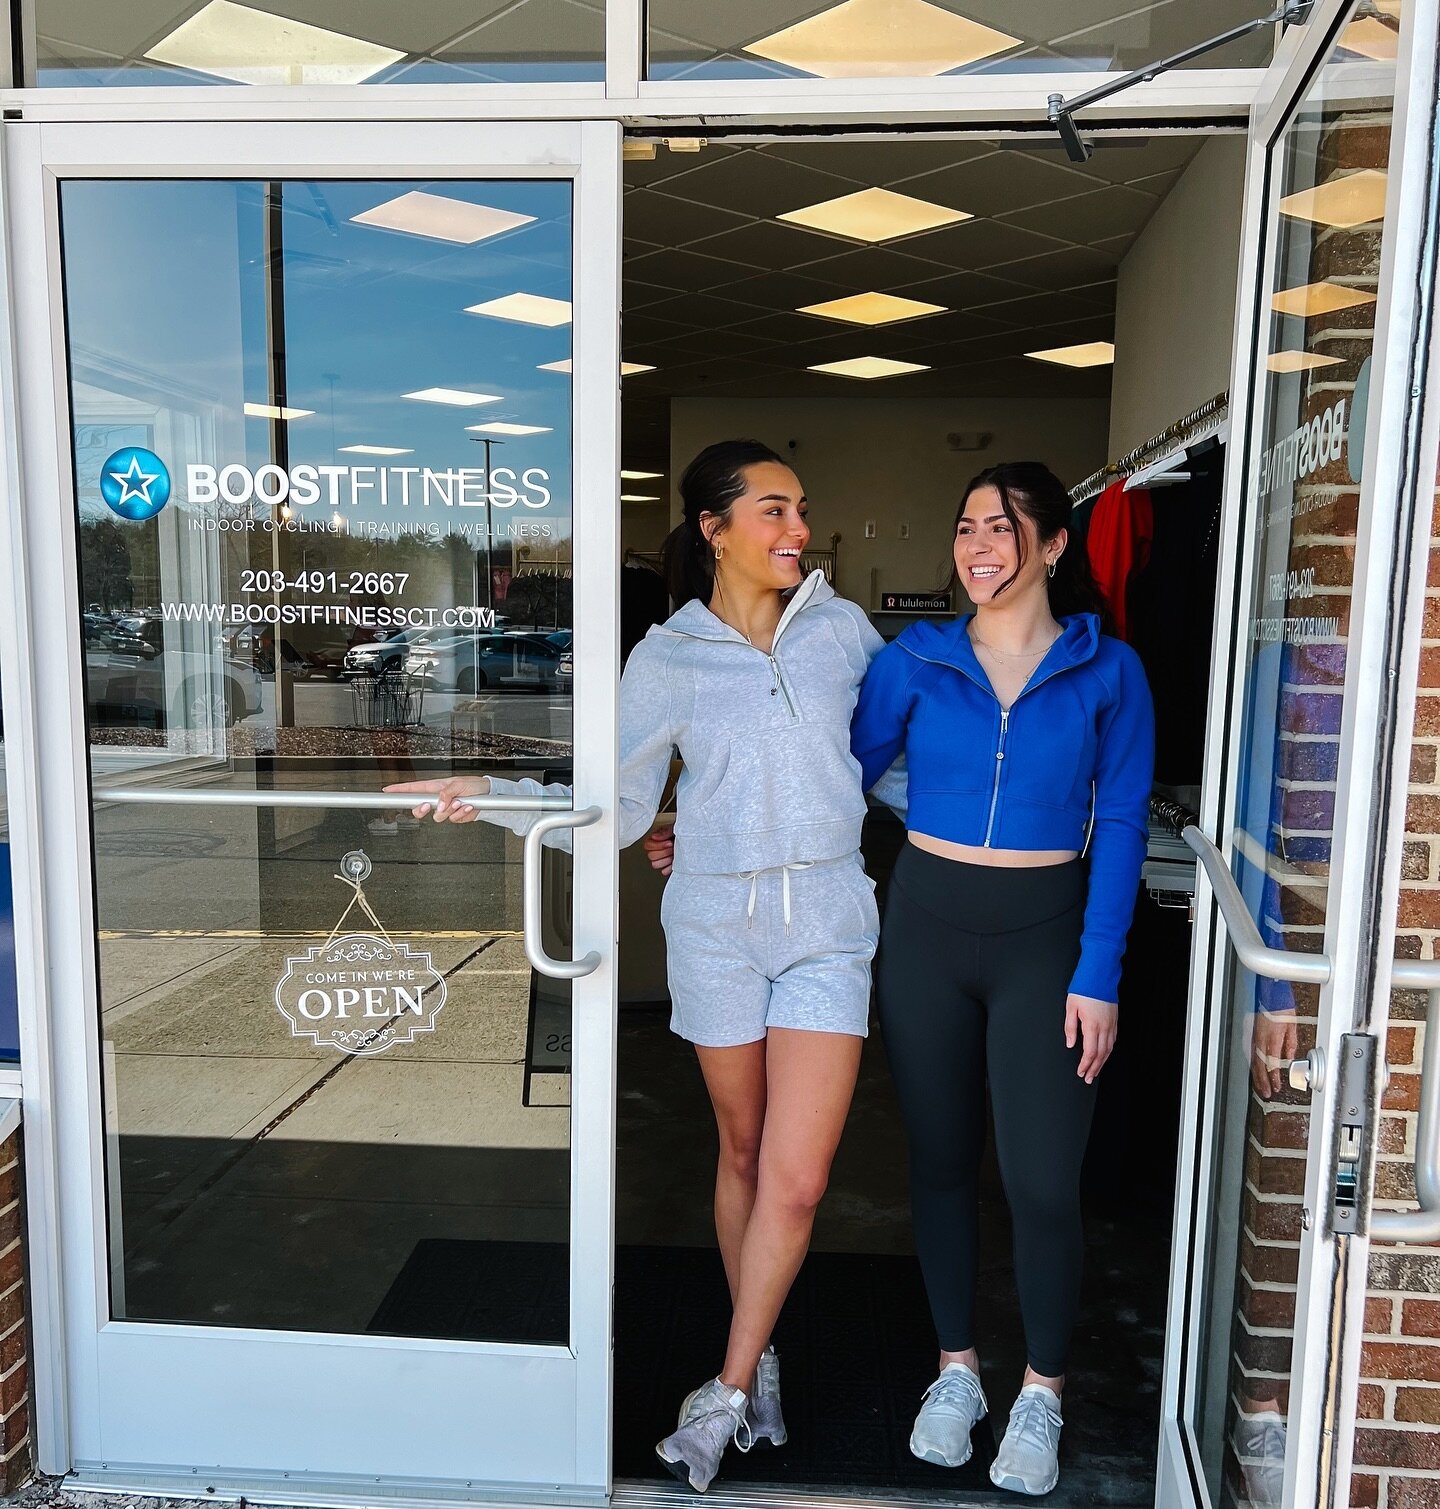 Welcome&hellip; come on in!

#boostfitness #newtownct #lululemon #indoorcycling #strengthtraining #yoga #boutiquefitness #treatyourself #timetoshop #fairfieldcounty #shopping